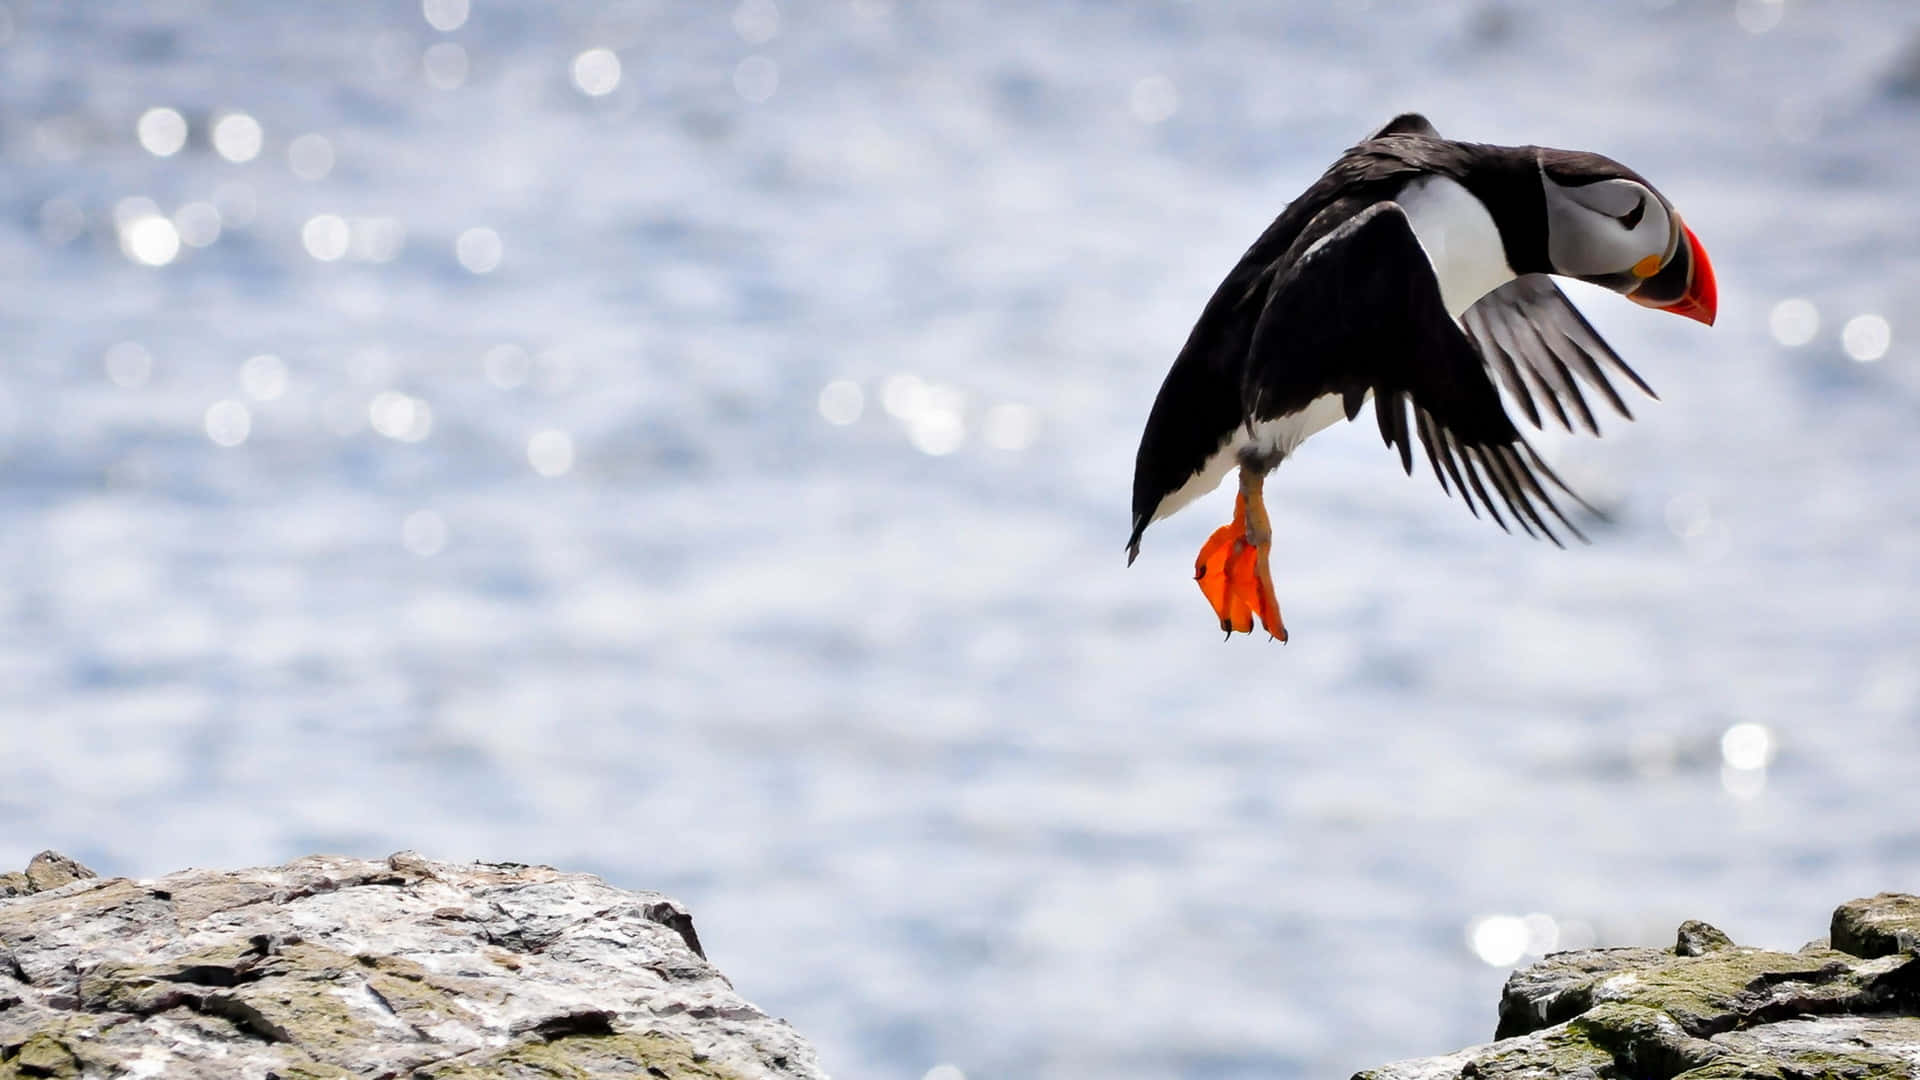 Puffin Mid Takeoff Over Water.jpg Wallpaper